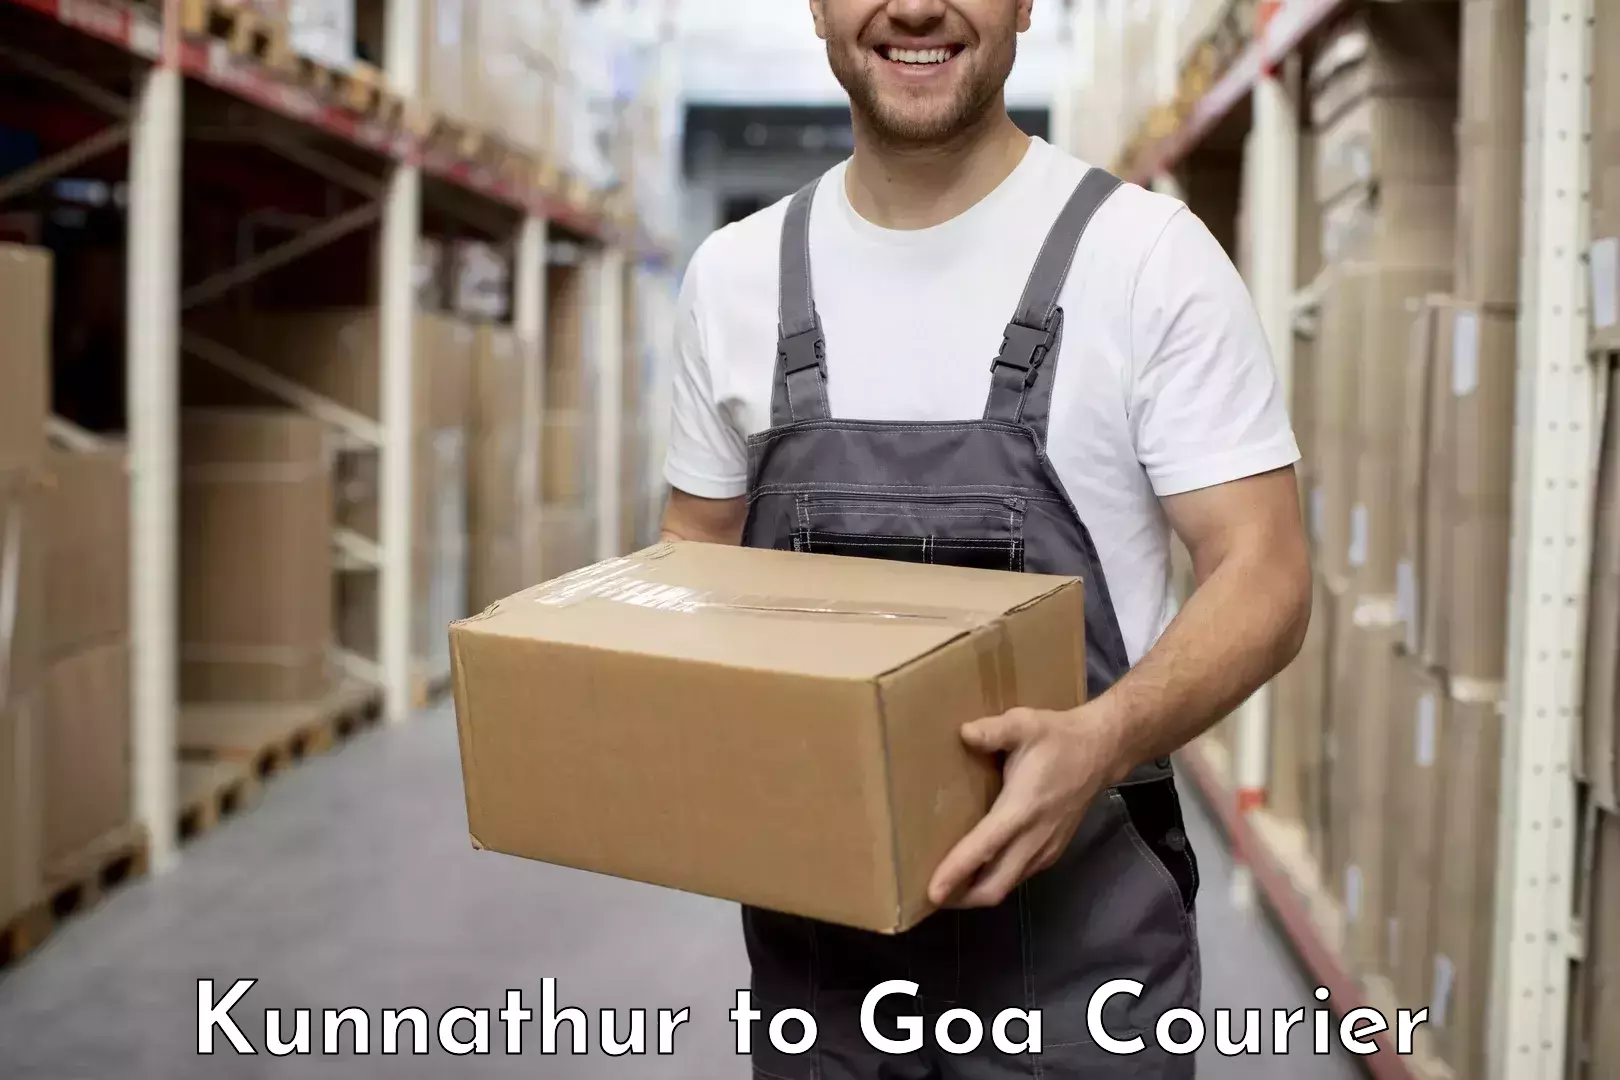 Cash on delivery service Kunnathur to Panjim